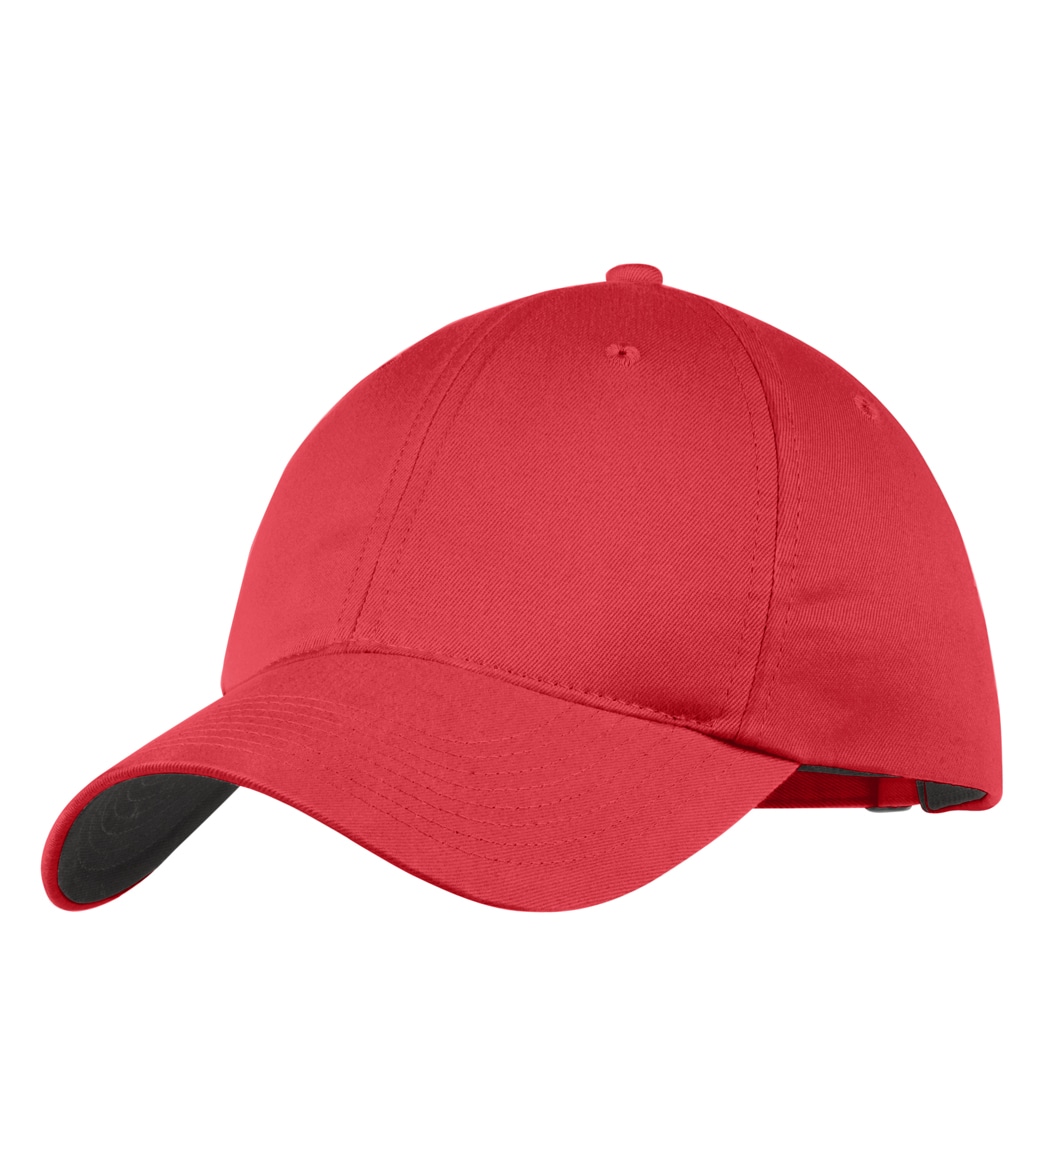 Nike Unstructured Twill Hat - Gym Red One Size Cotton - Swimoutlet.com